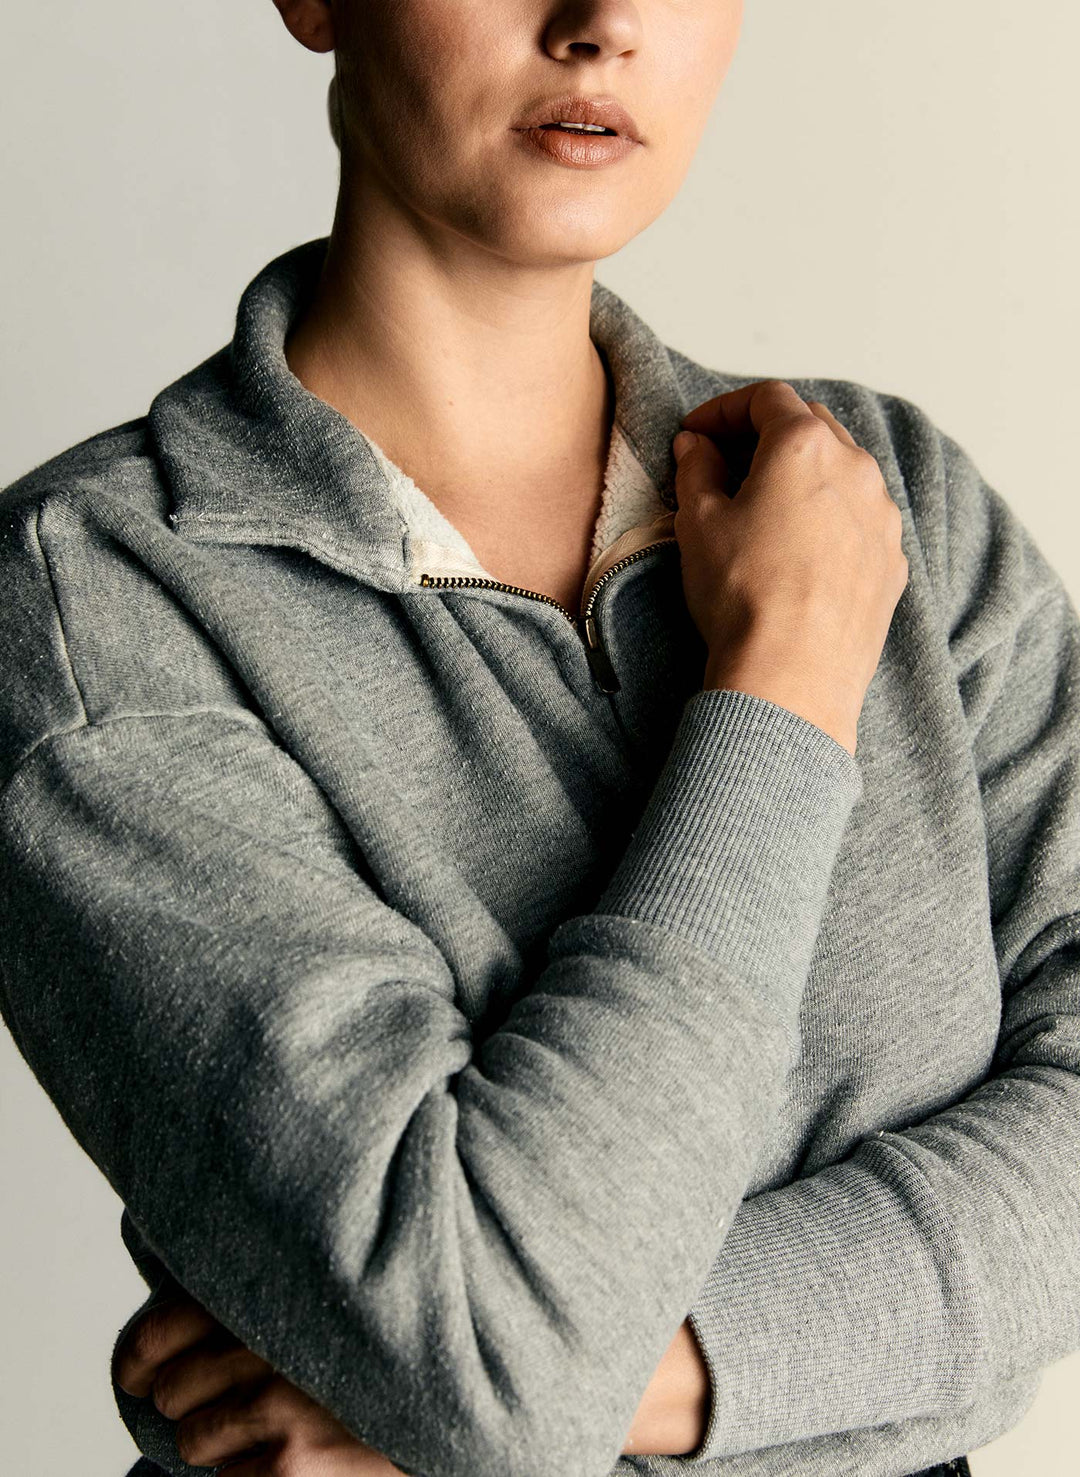 a person wearing a grey sweater